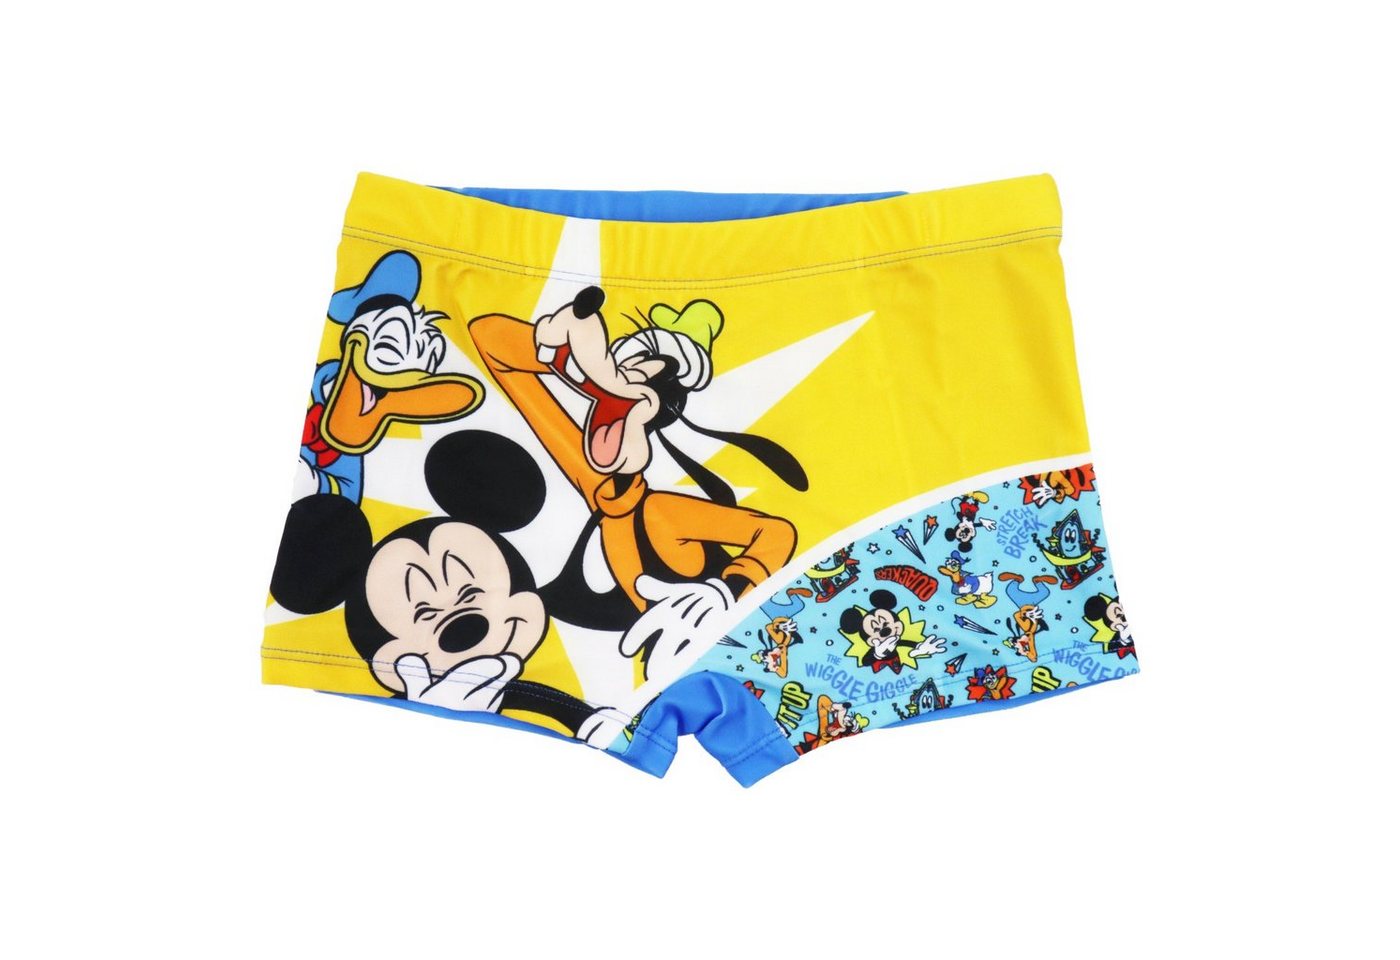 Disney Mickey Mouse Badehose Mickey Maus Donald Duck Goofy Kinder Jungen Badehose Badepants Gr. 98 bis 128 von Disney Mickey Mouse